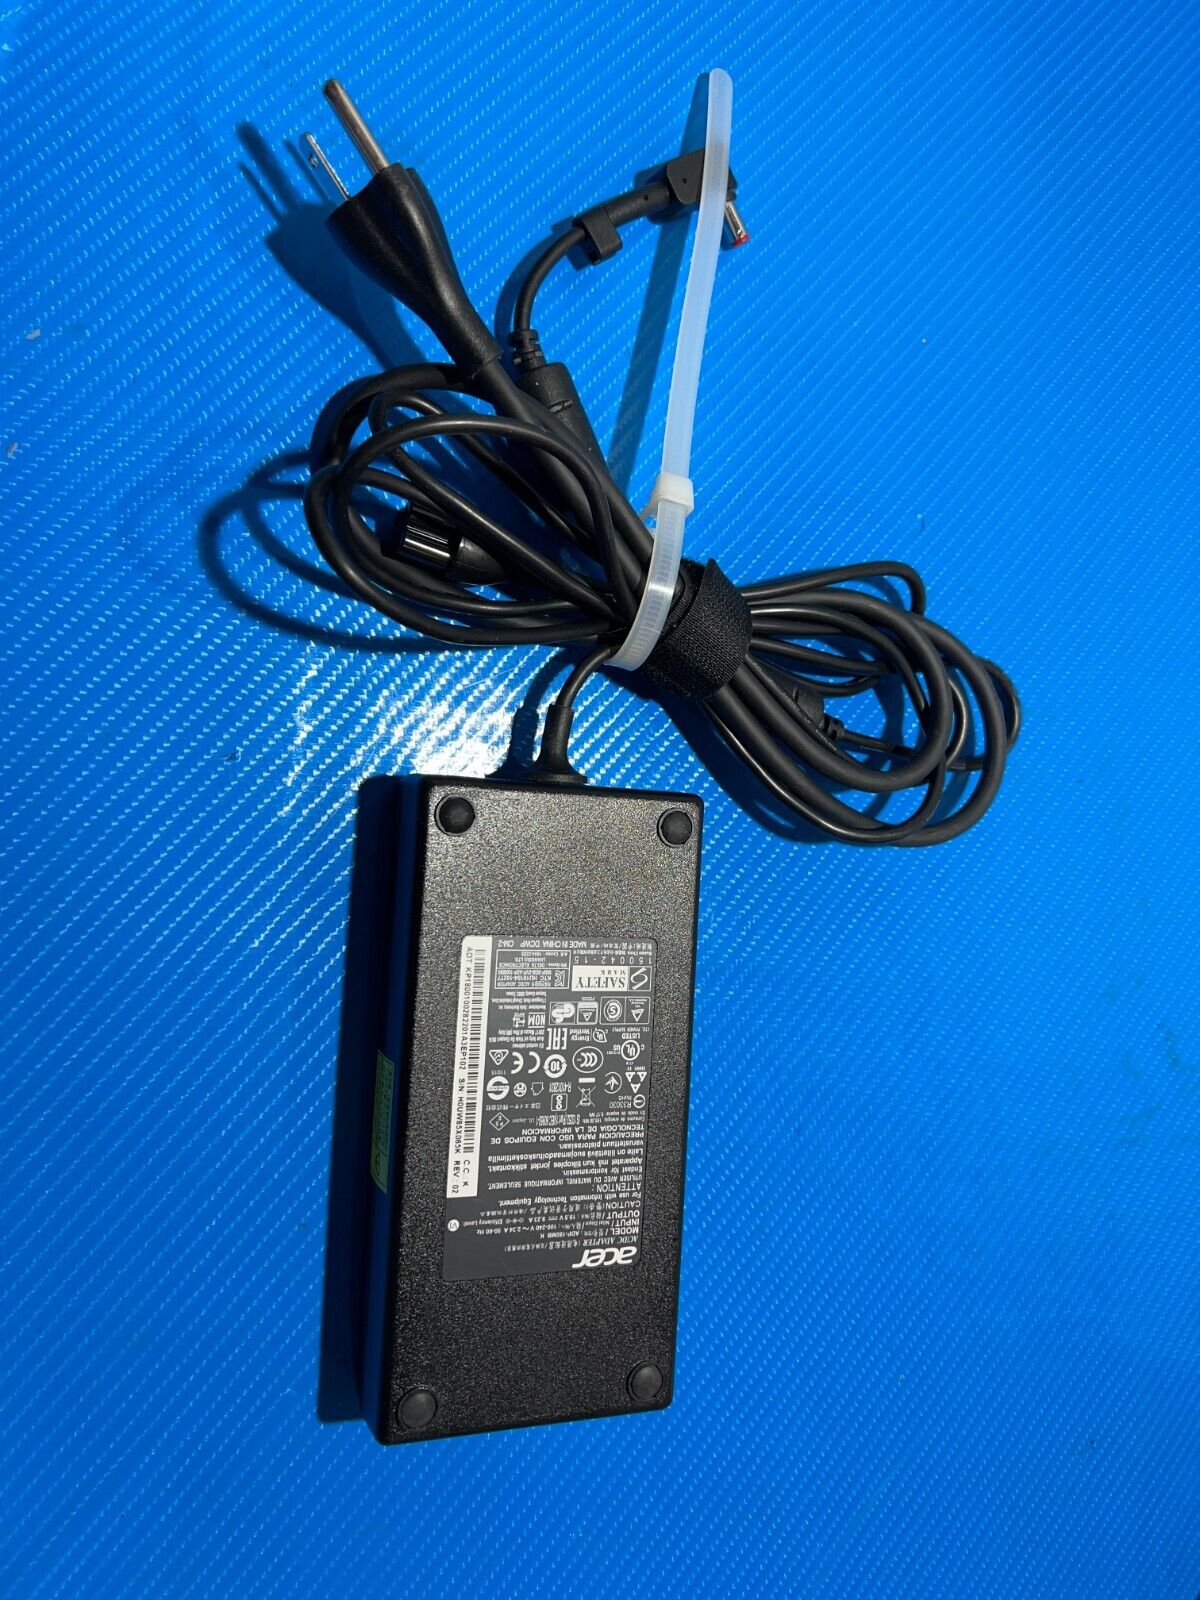 Acer Aspire A715-72 A715-72G Ac Adapter Charger & Power Cord 180W ADP-180MB K